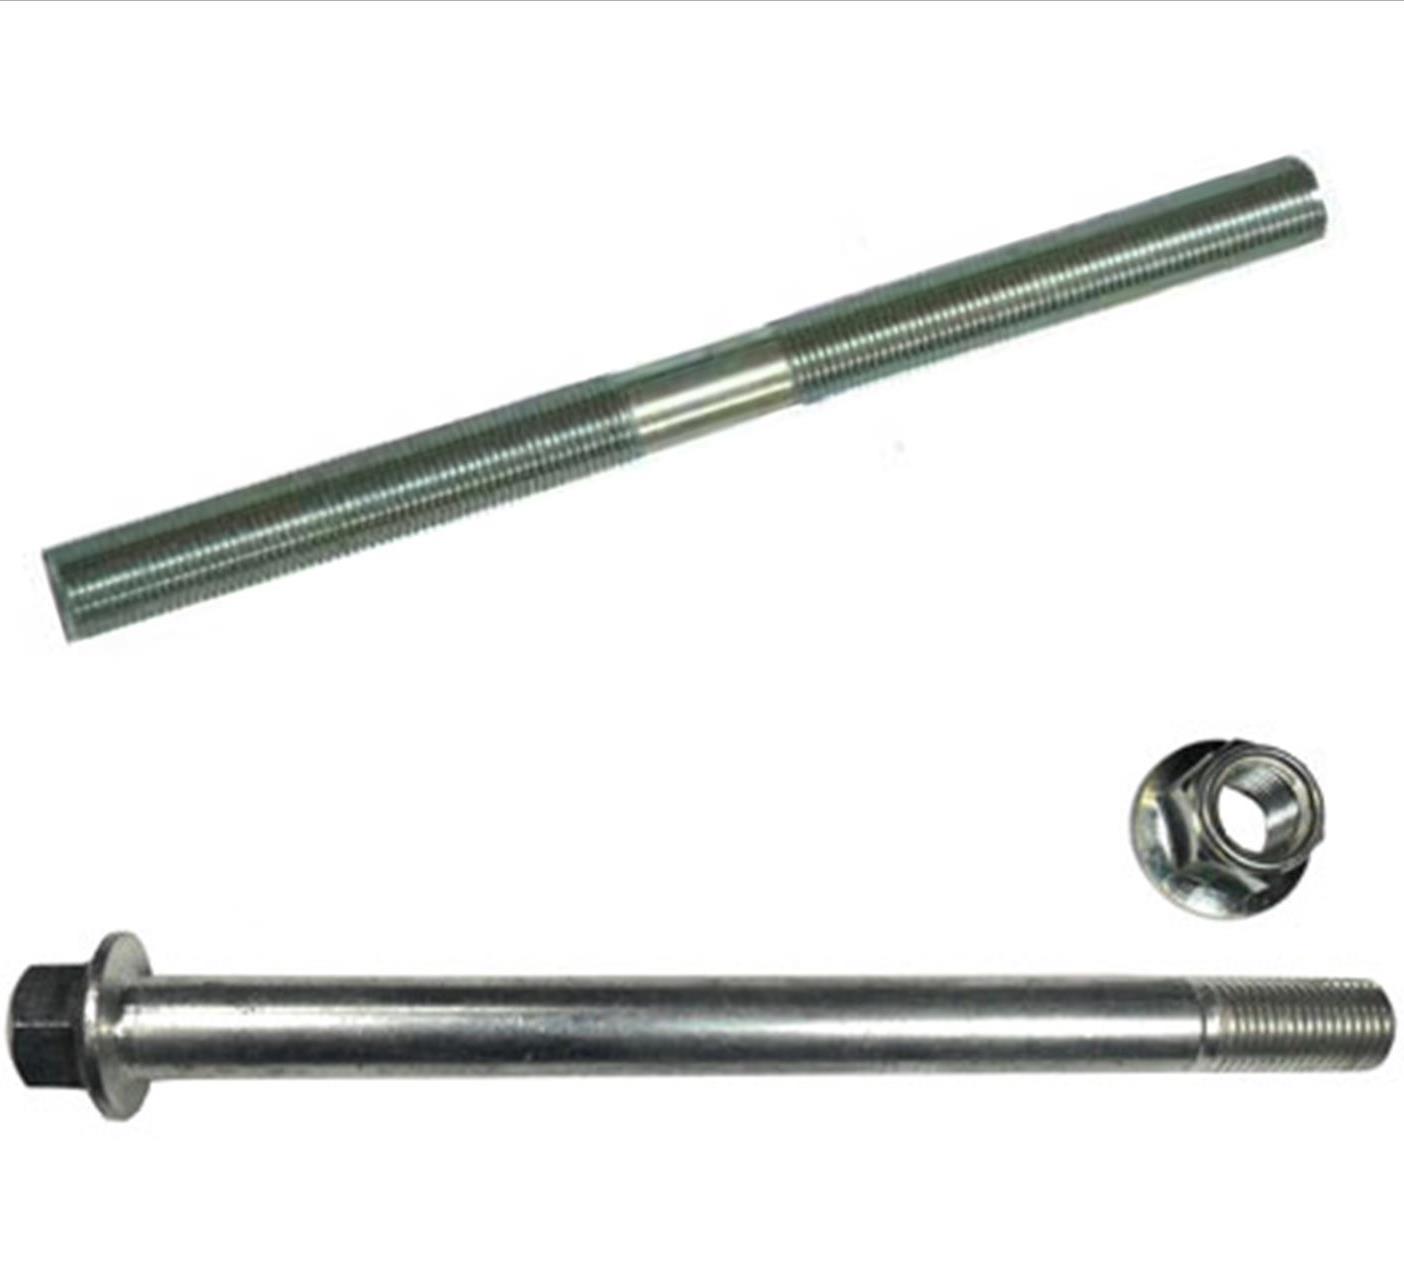 Axles - Axle Bolts Scooters-Mopeds-Dirtbikes